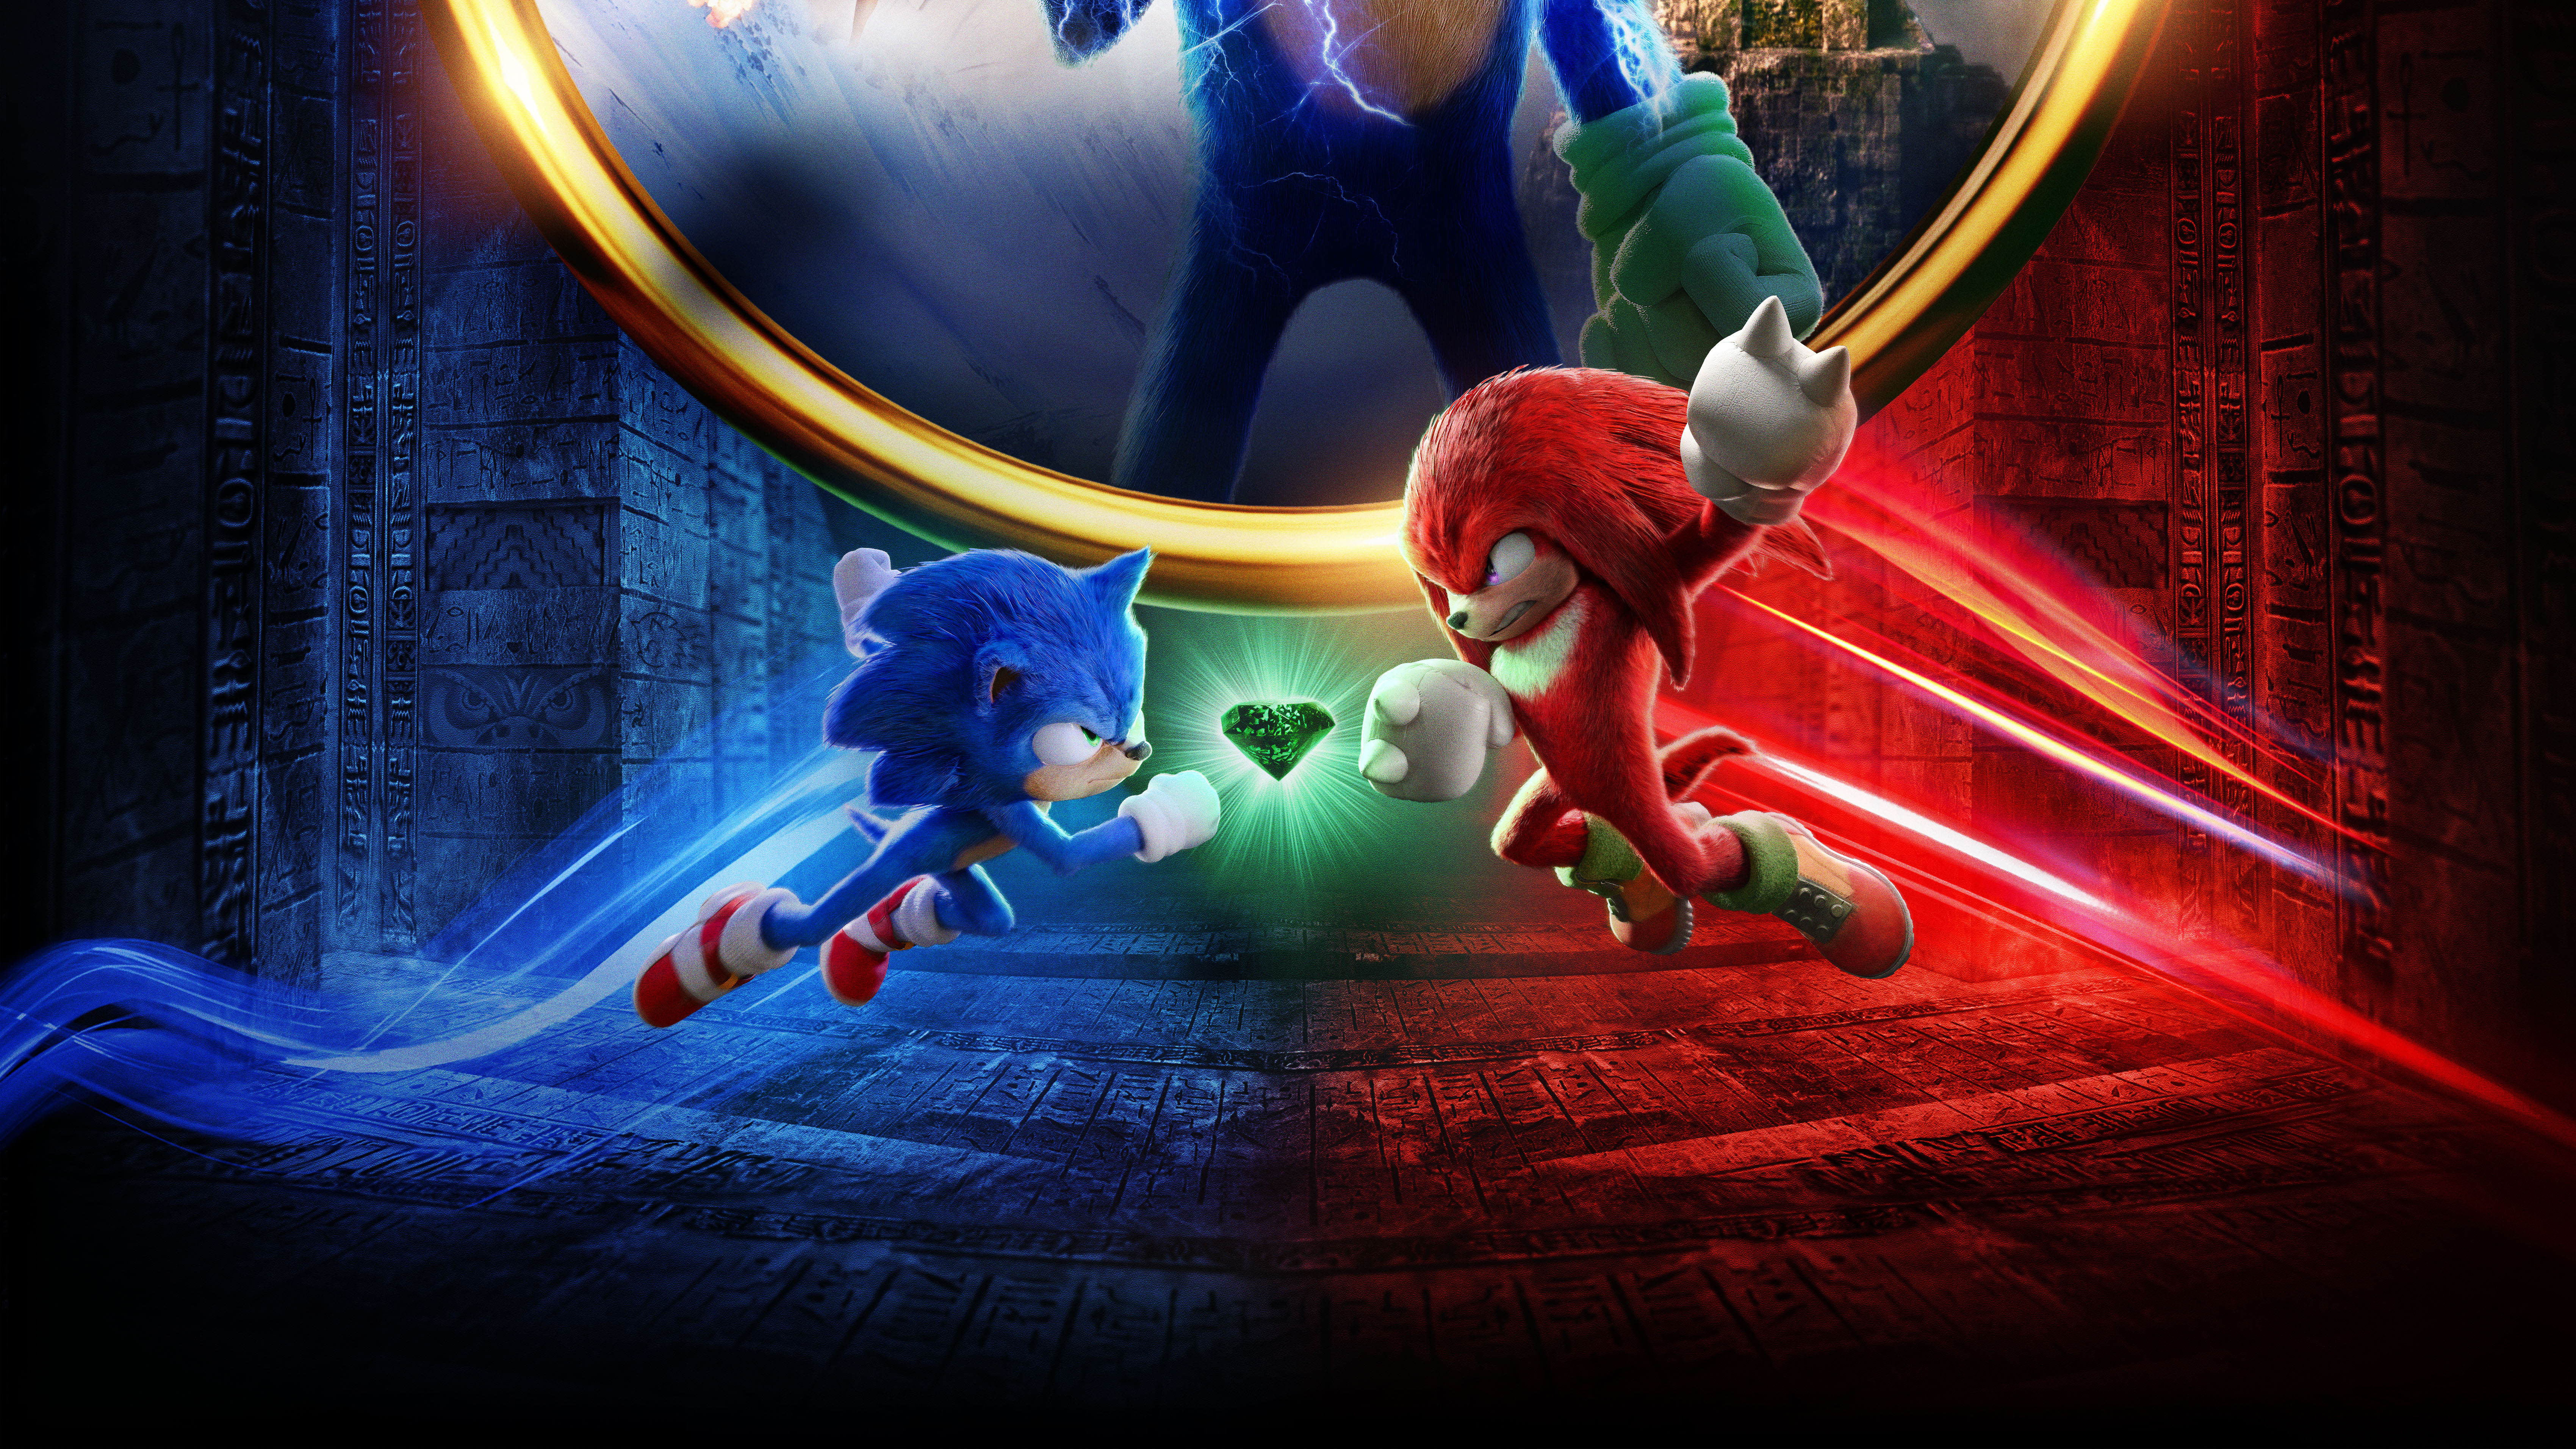 HD wallpaper Sonic Sonic 2 The Movie Sonic the Hedgehog movie poster   Wallpaper Flare